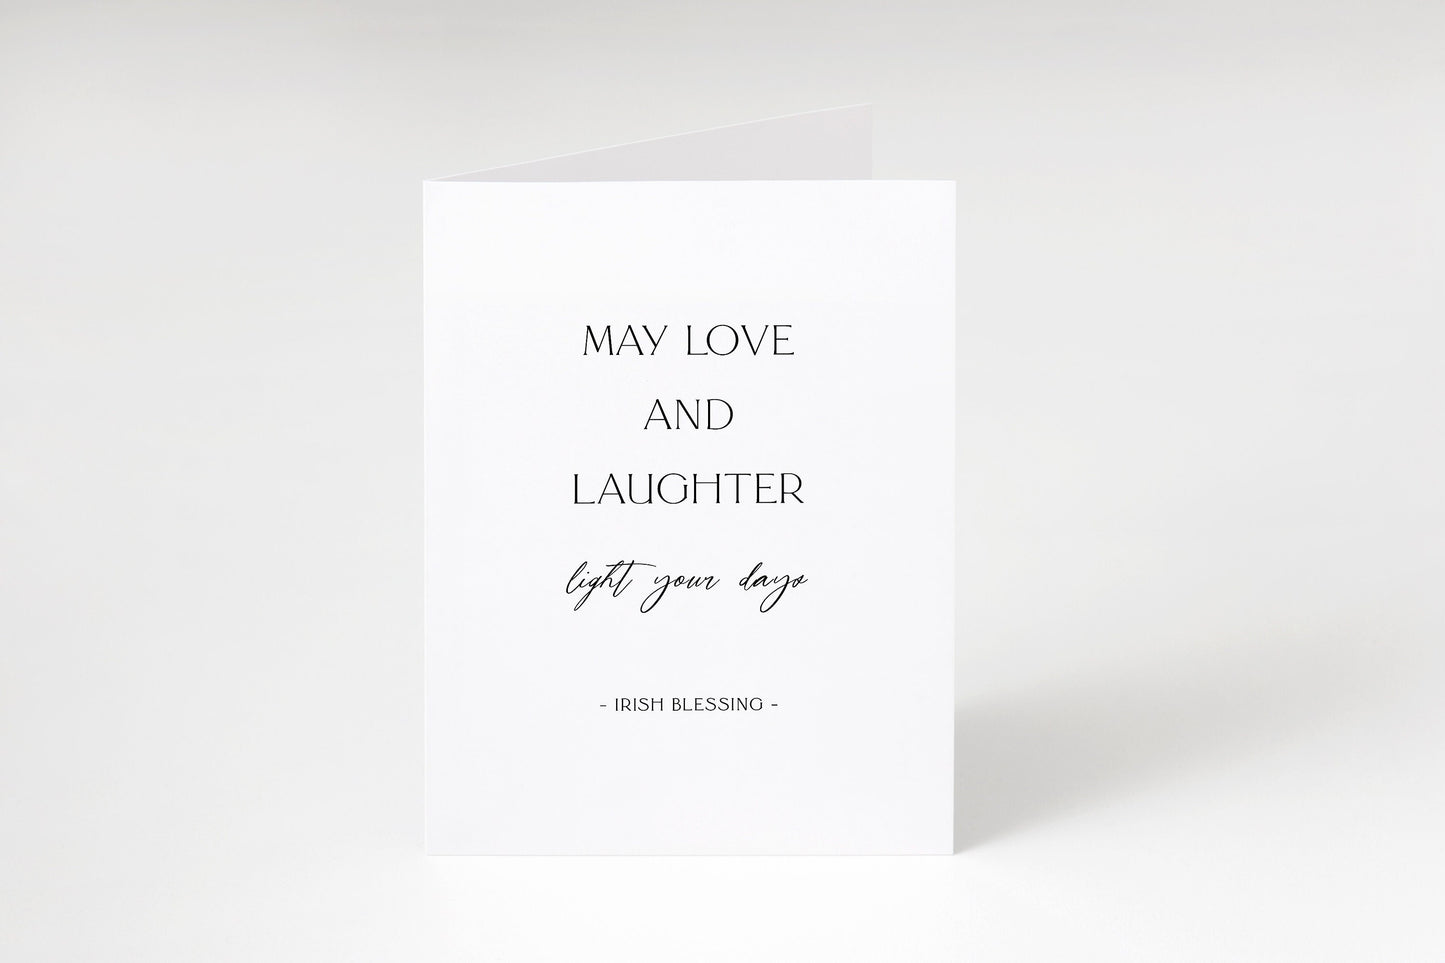 May love and laughter light your days,Irish blessing greeting card,Best wishes card,Encouragement card,Irish saying,Greeting card handmade